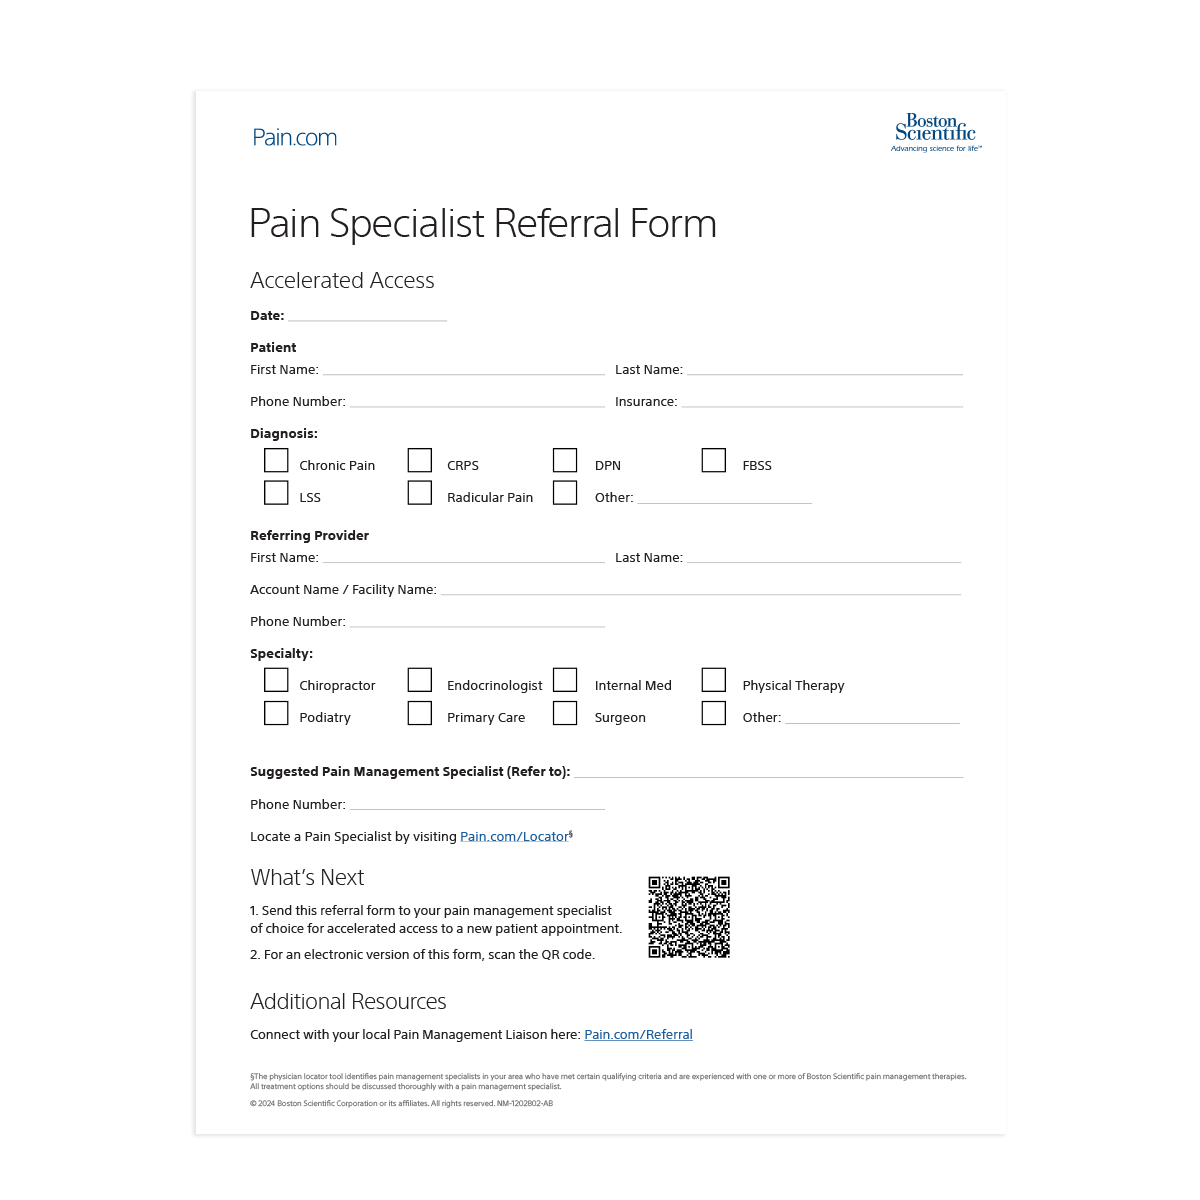 Form titled "Pain Specialist Referral Form".